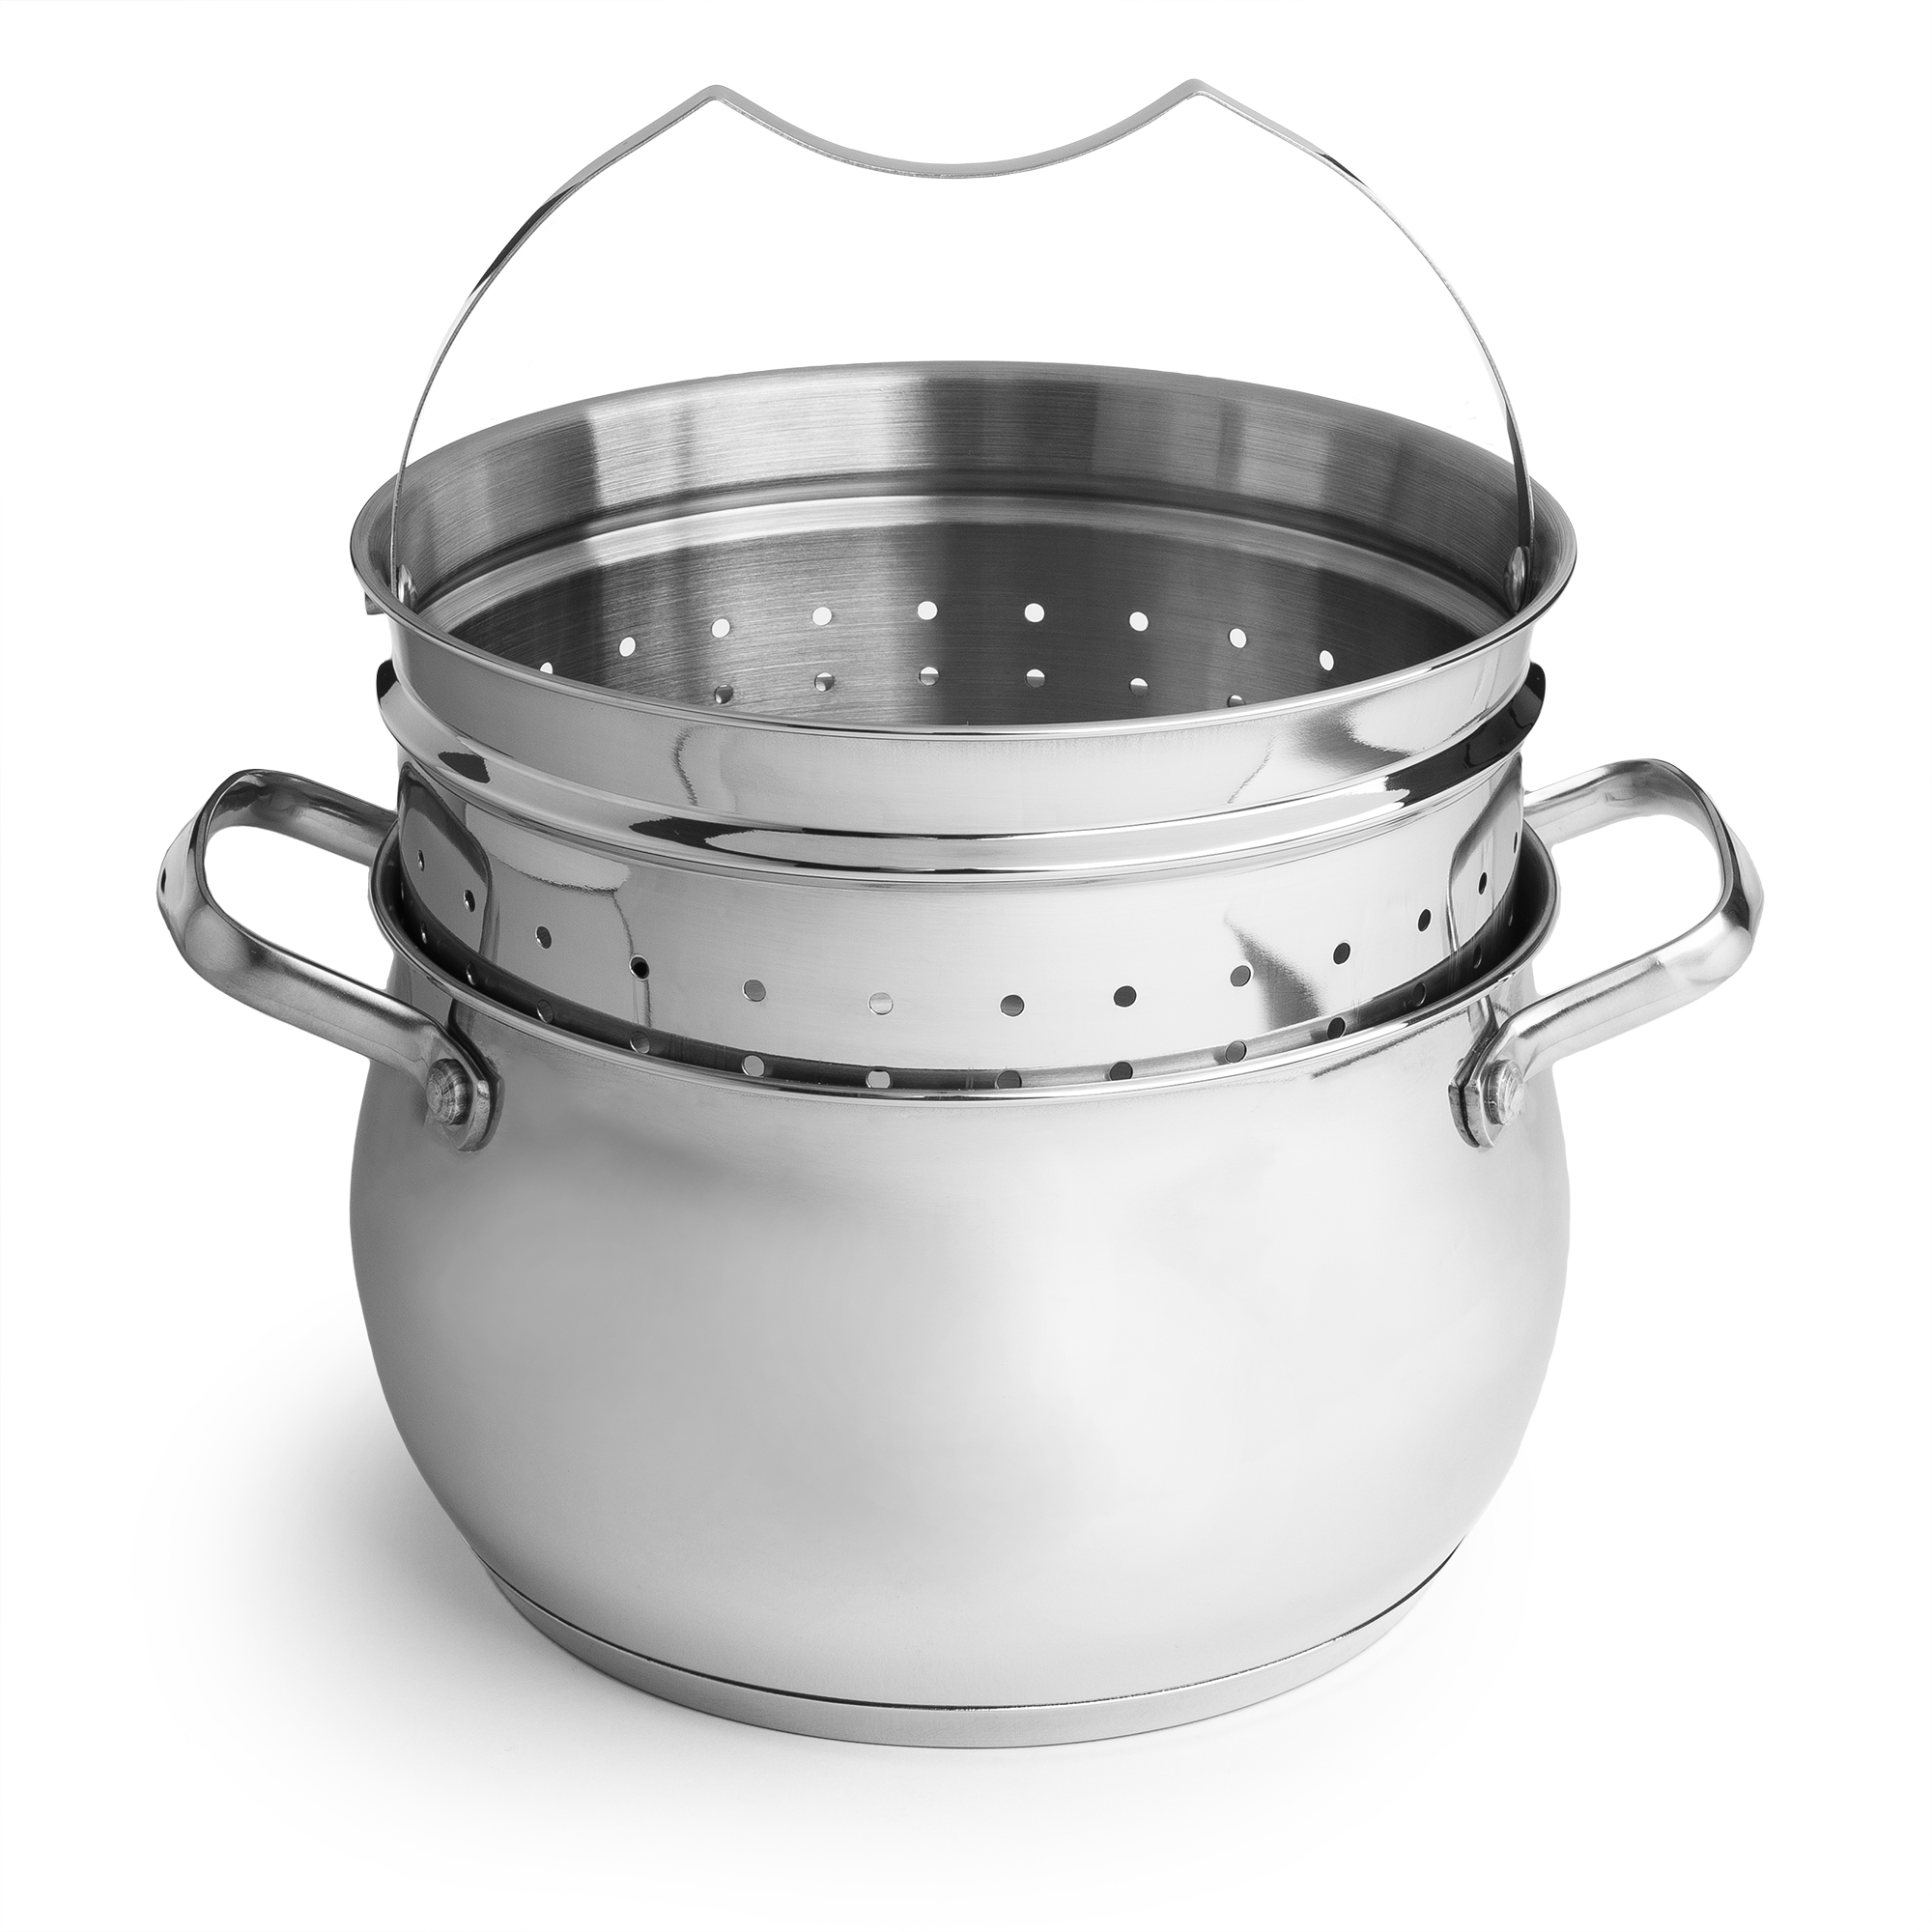 Tasty 6 Piece Premium Stainless Steel Cookware Set - image 5 of 9